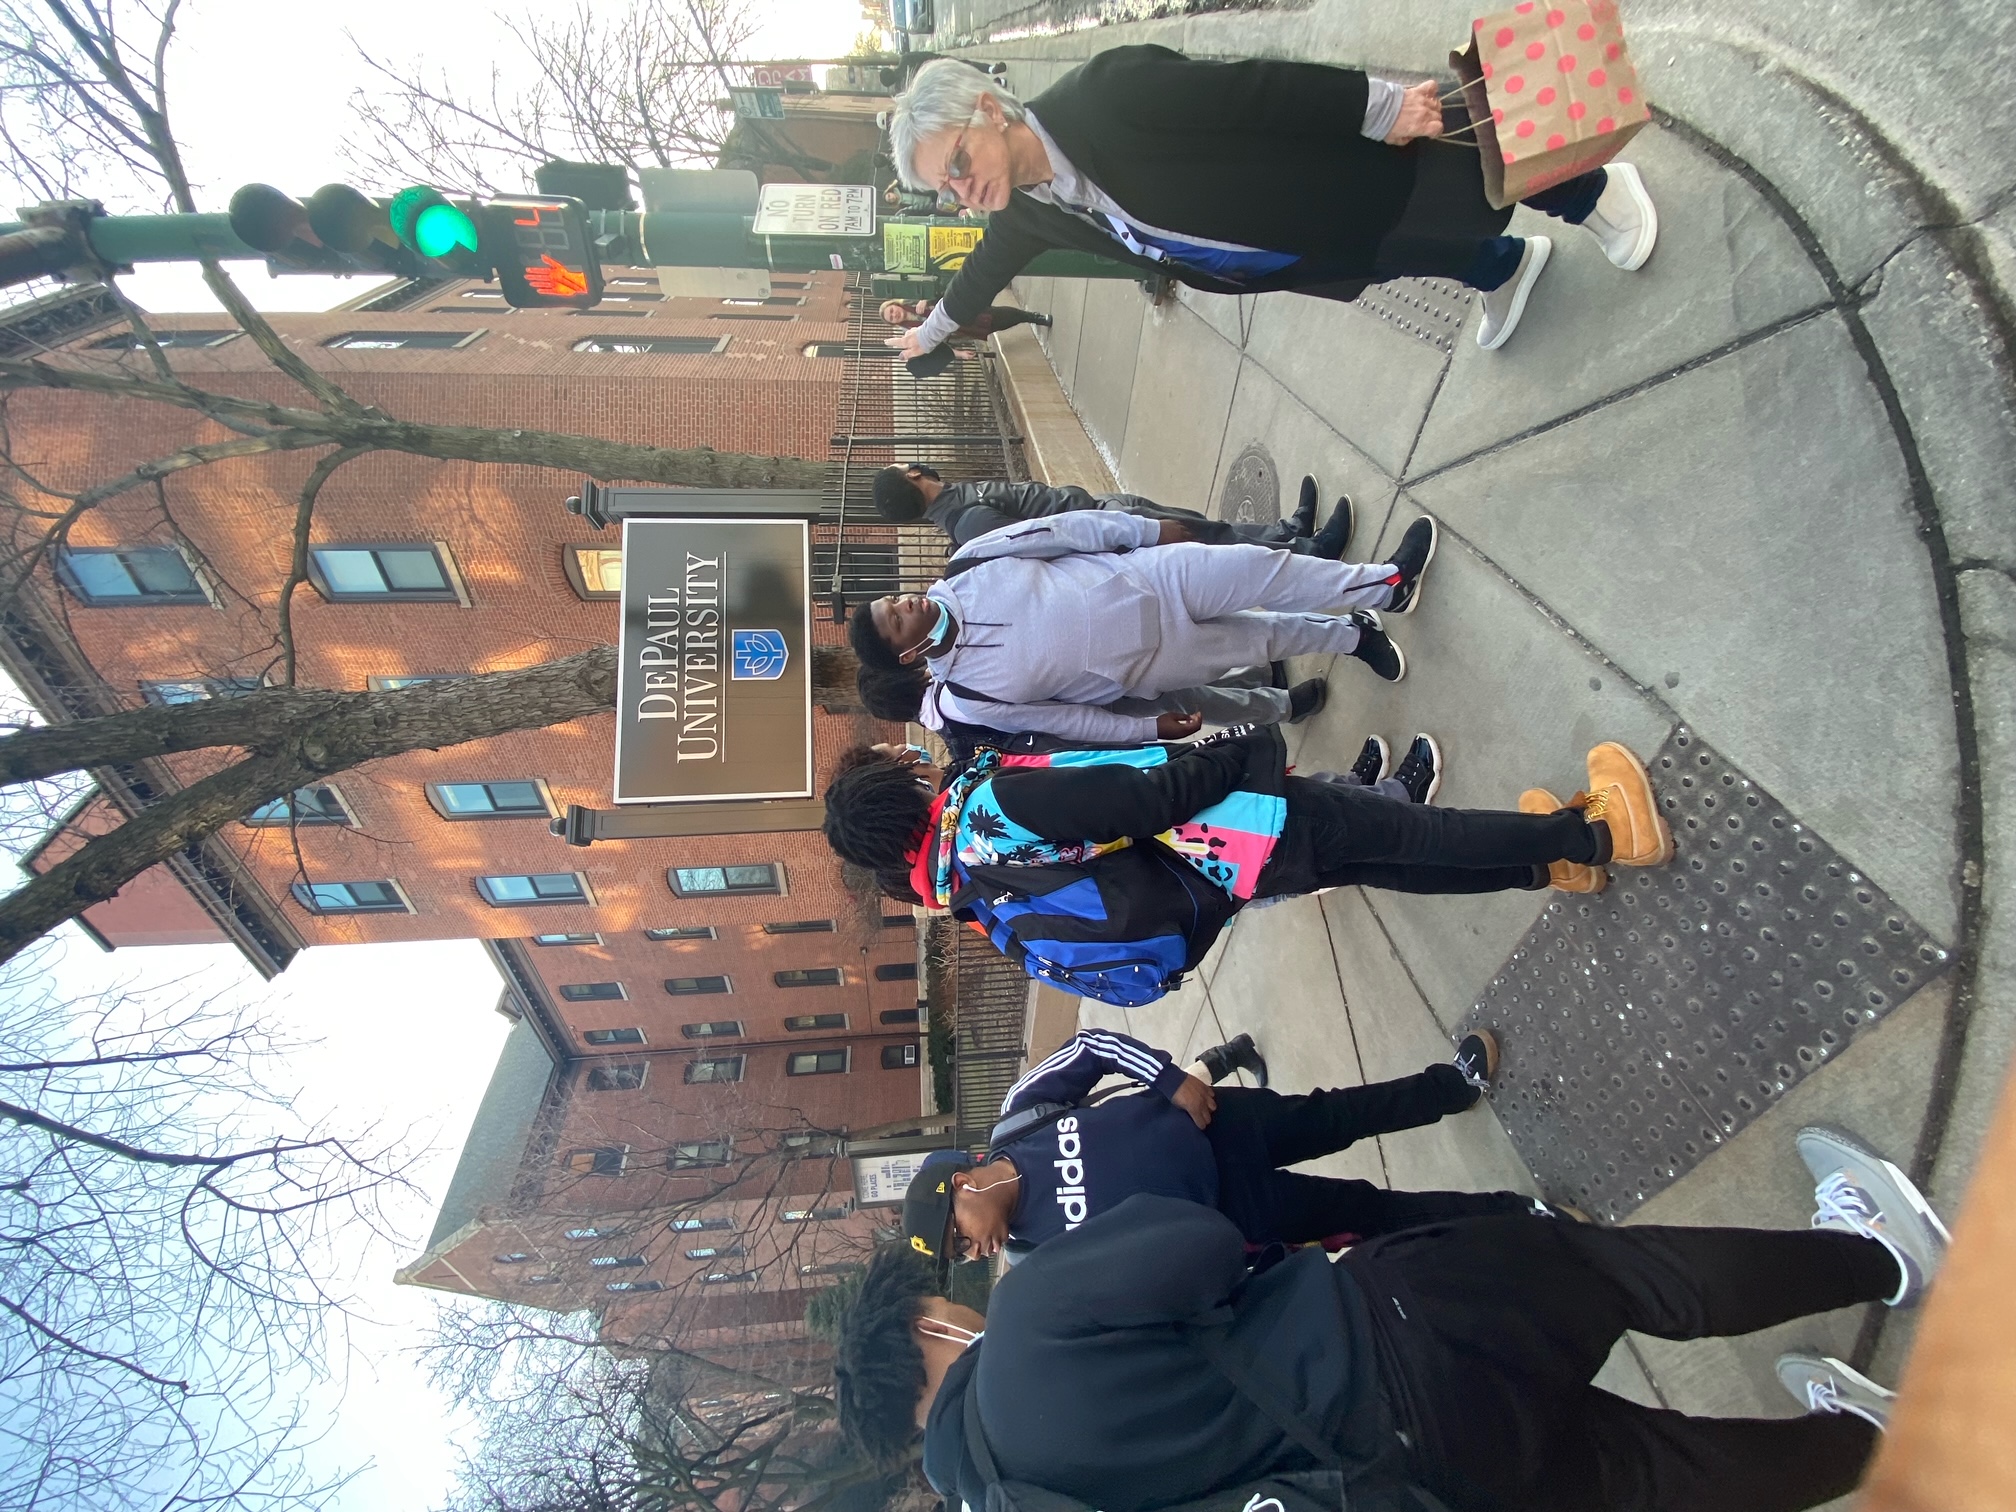 Students touring DePaul campus